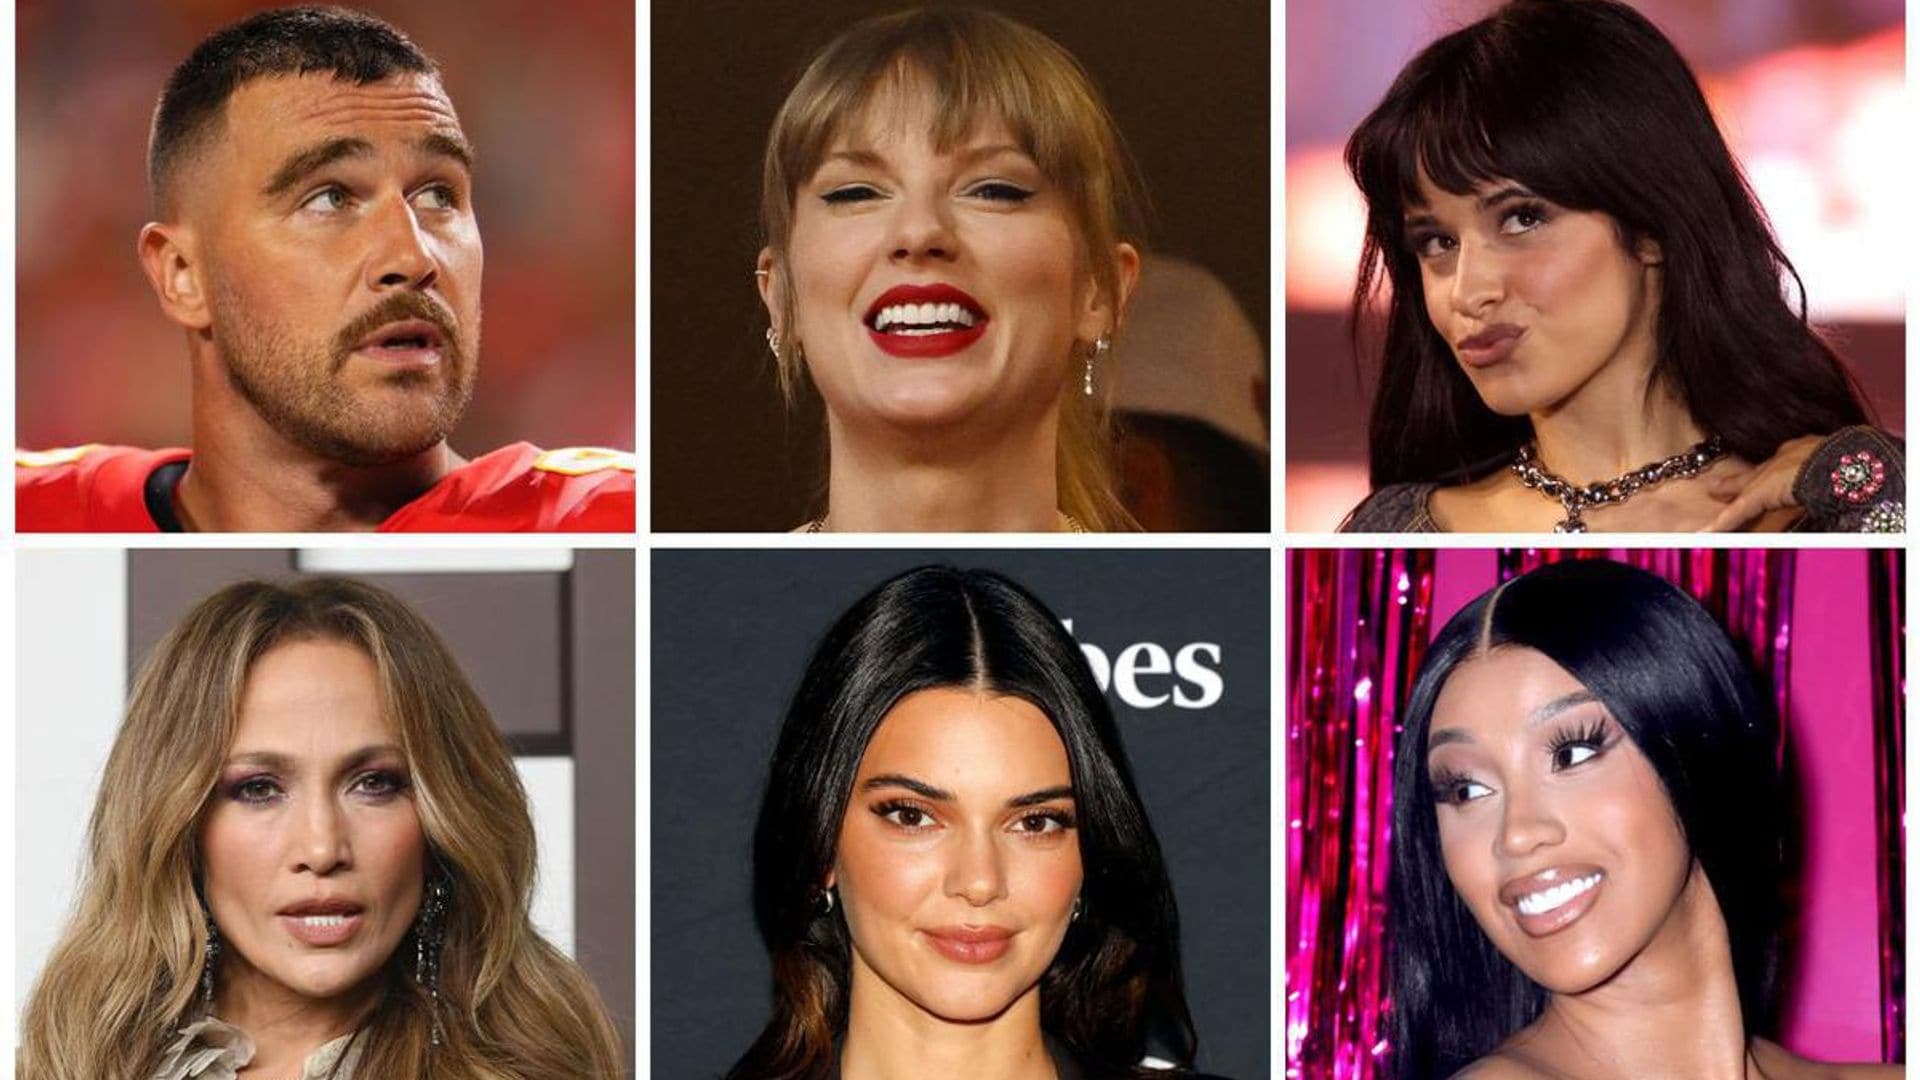 Watch the 10 Best Celebrity TikToks of the Week: Camila Cabello, Taylor Swift, Kendall Jenner, and more